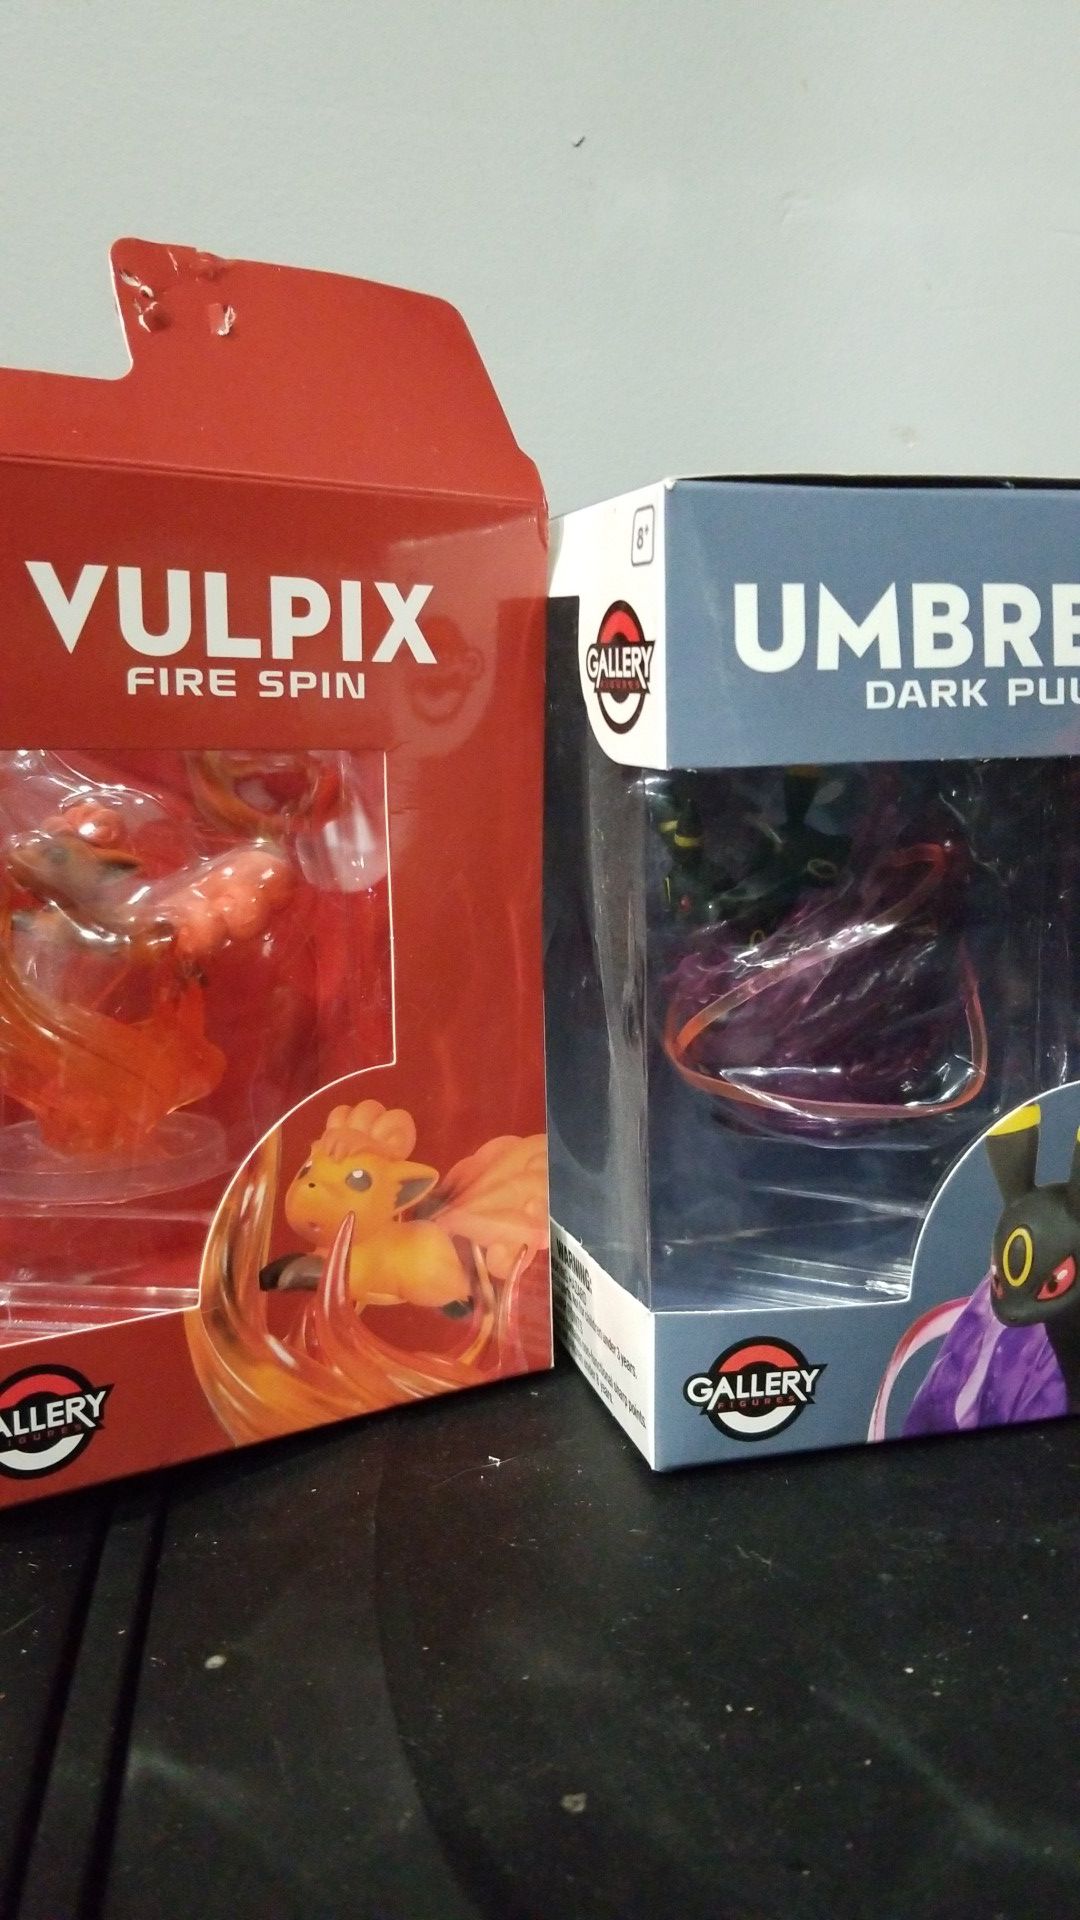 Pokemon Gallery figures. Umbreon and Vulpix collectibles